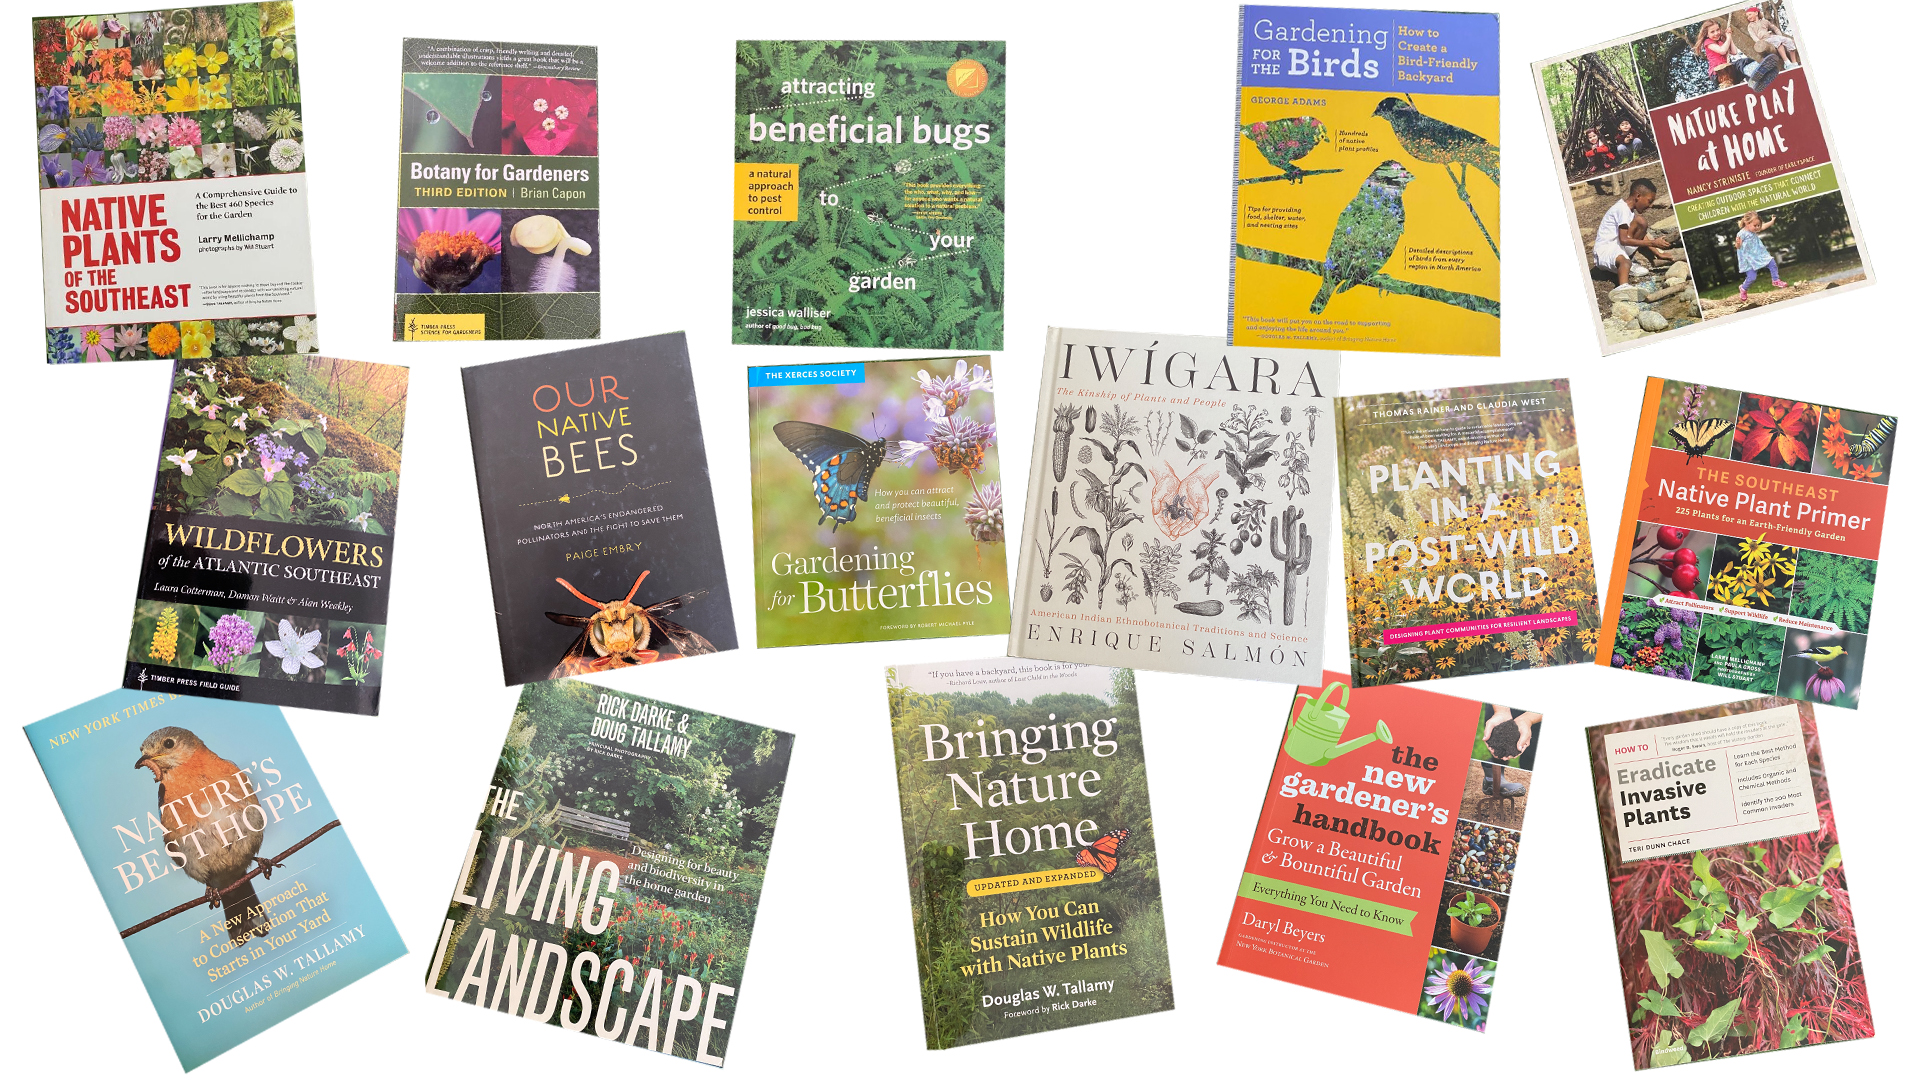 collage of many books covers about native plants, insects, and nature